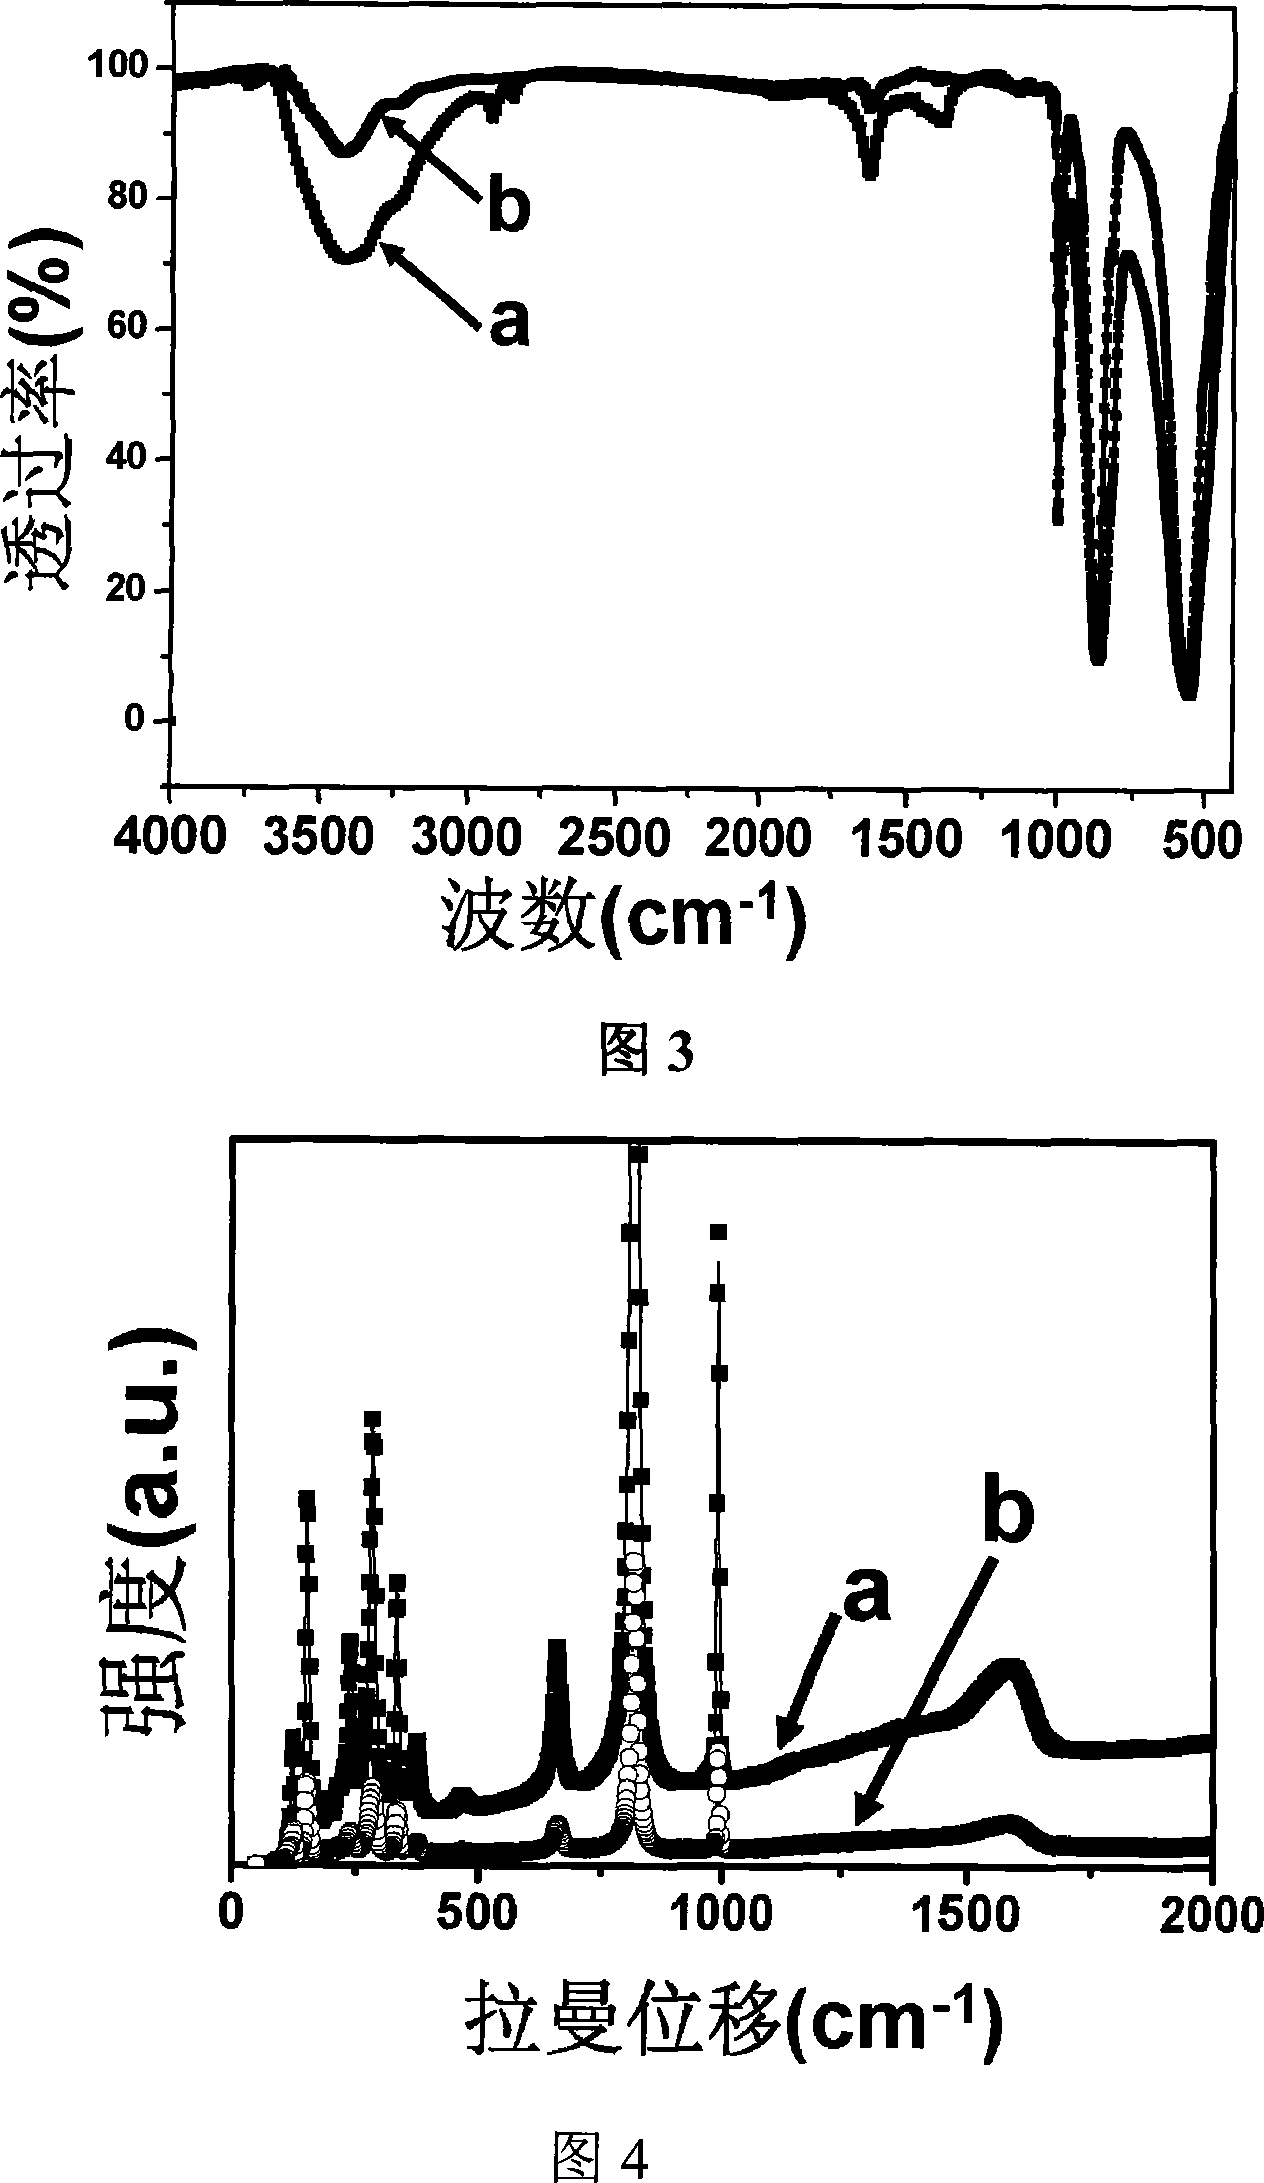 Lithiation molybdenum trioxide nano band electrode material and its lithiation modifying method